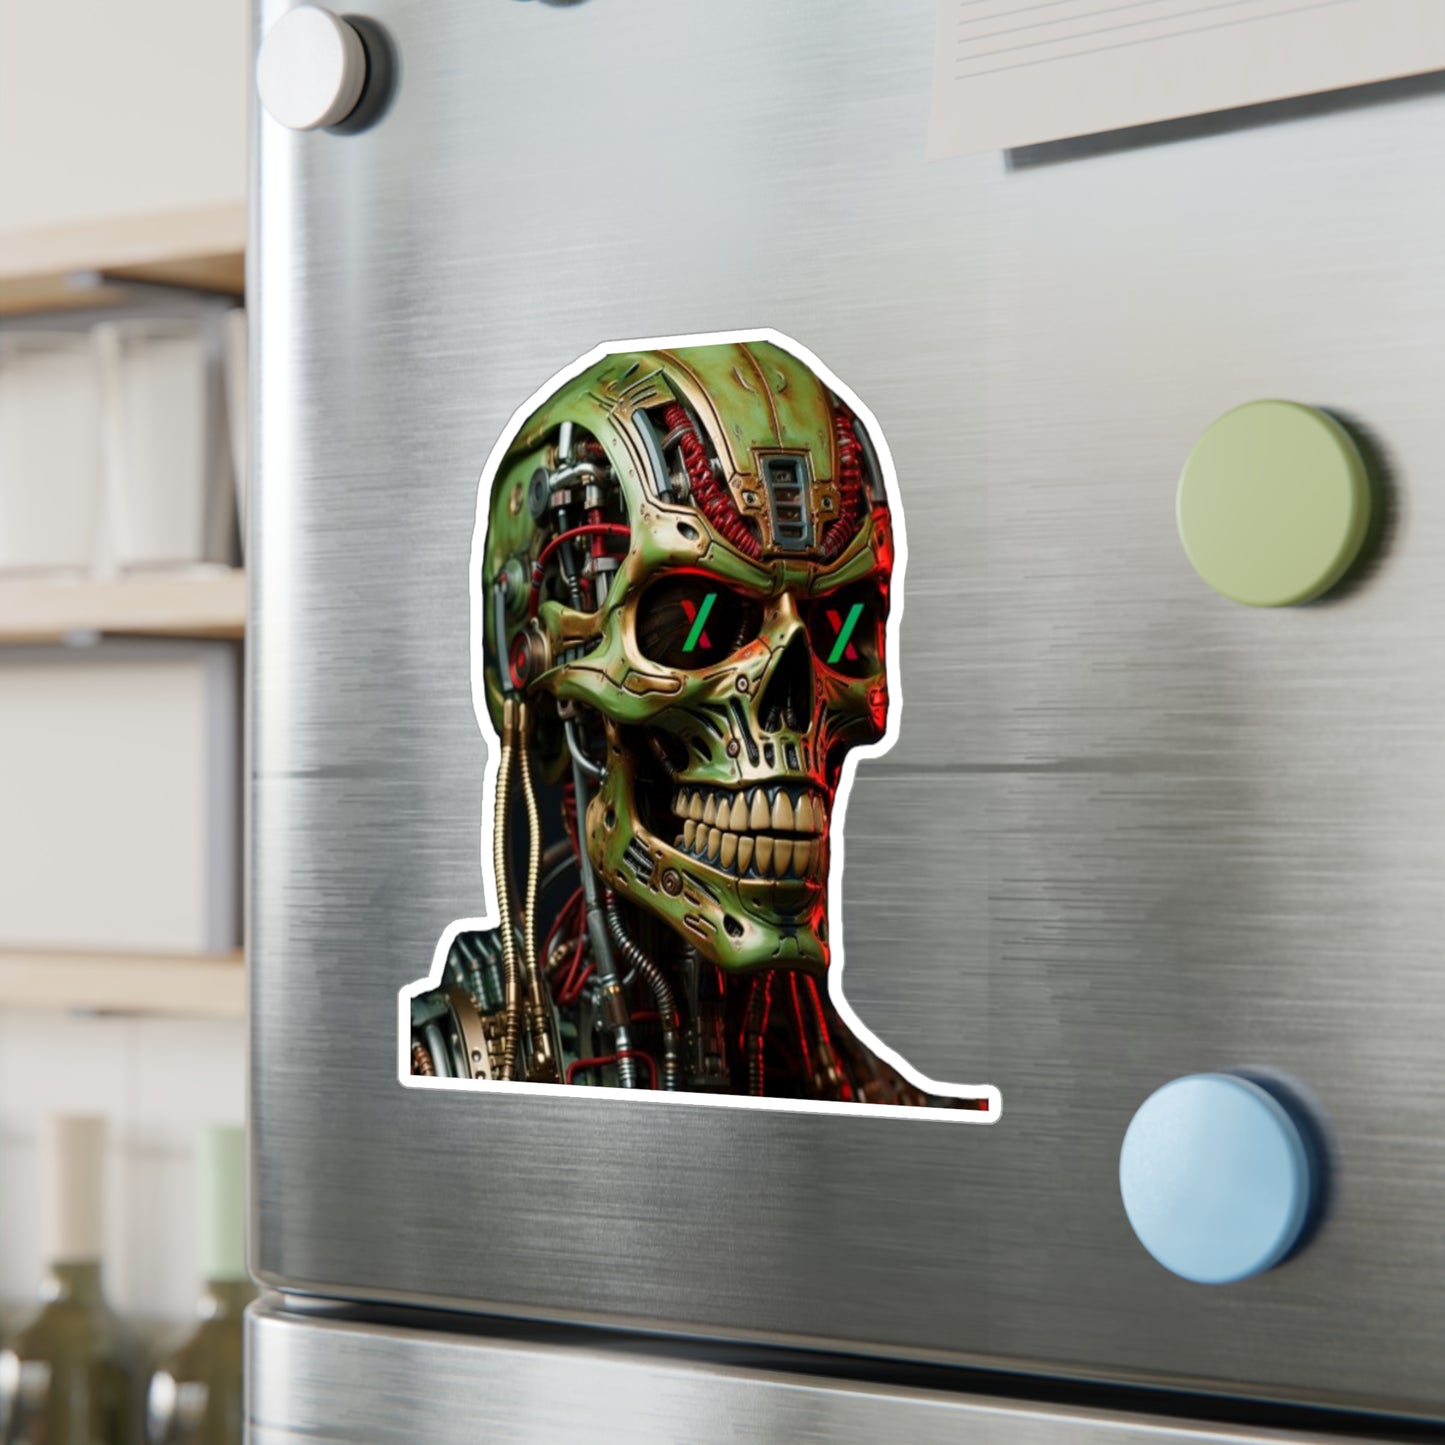 Pulse X Terminator Vinyl Decal - DeFi Outfitters